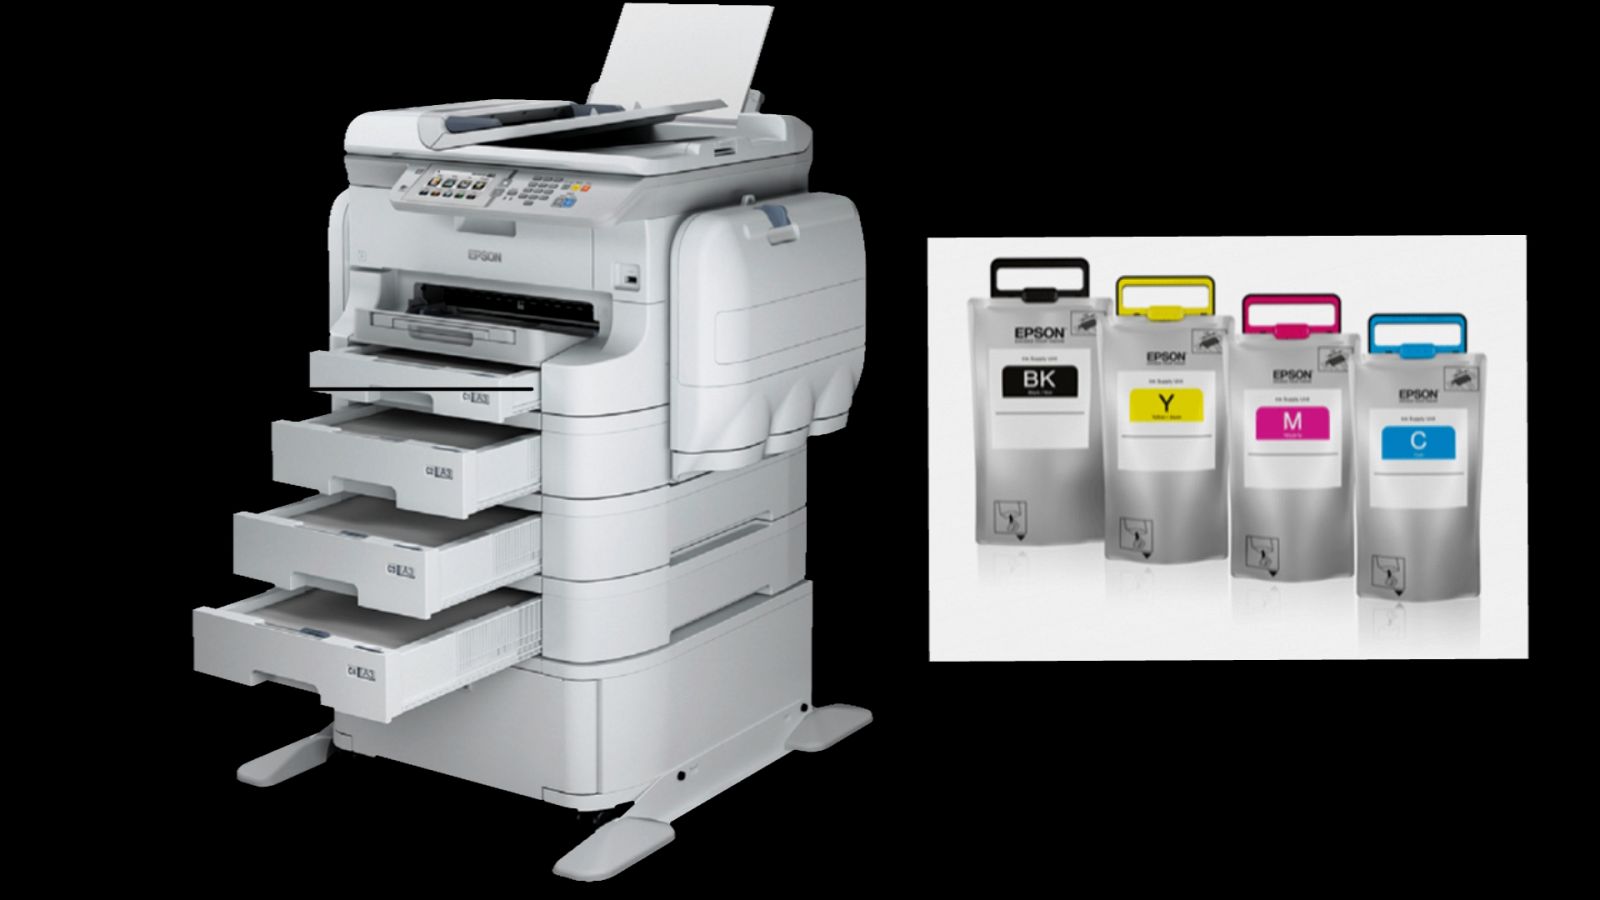 Epson slashes business printing costs with ‘RIPS’ technology